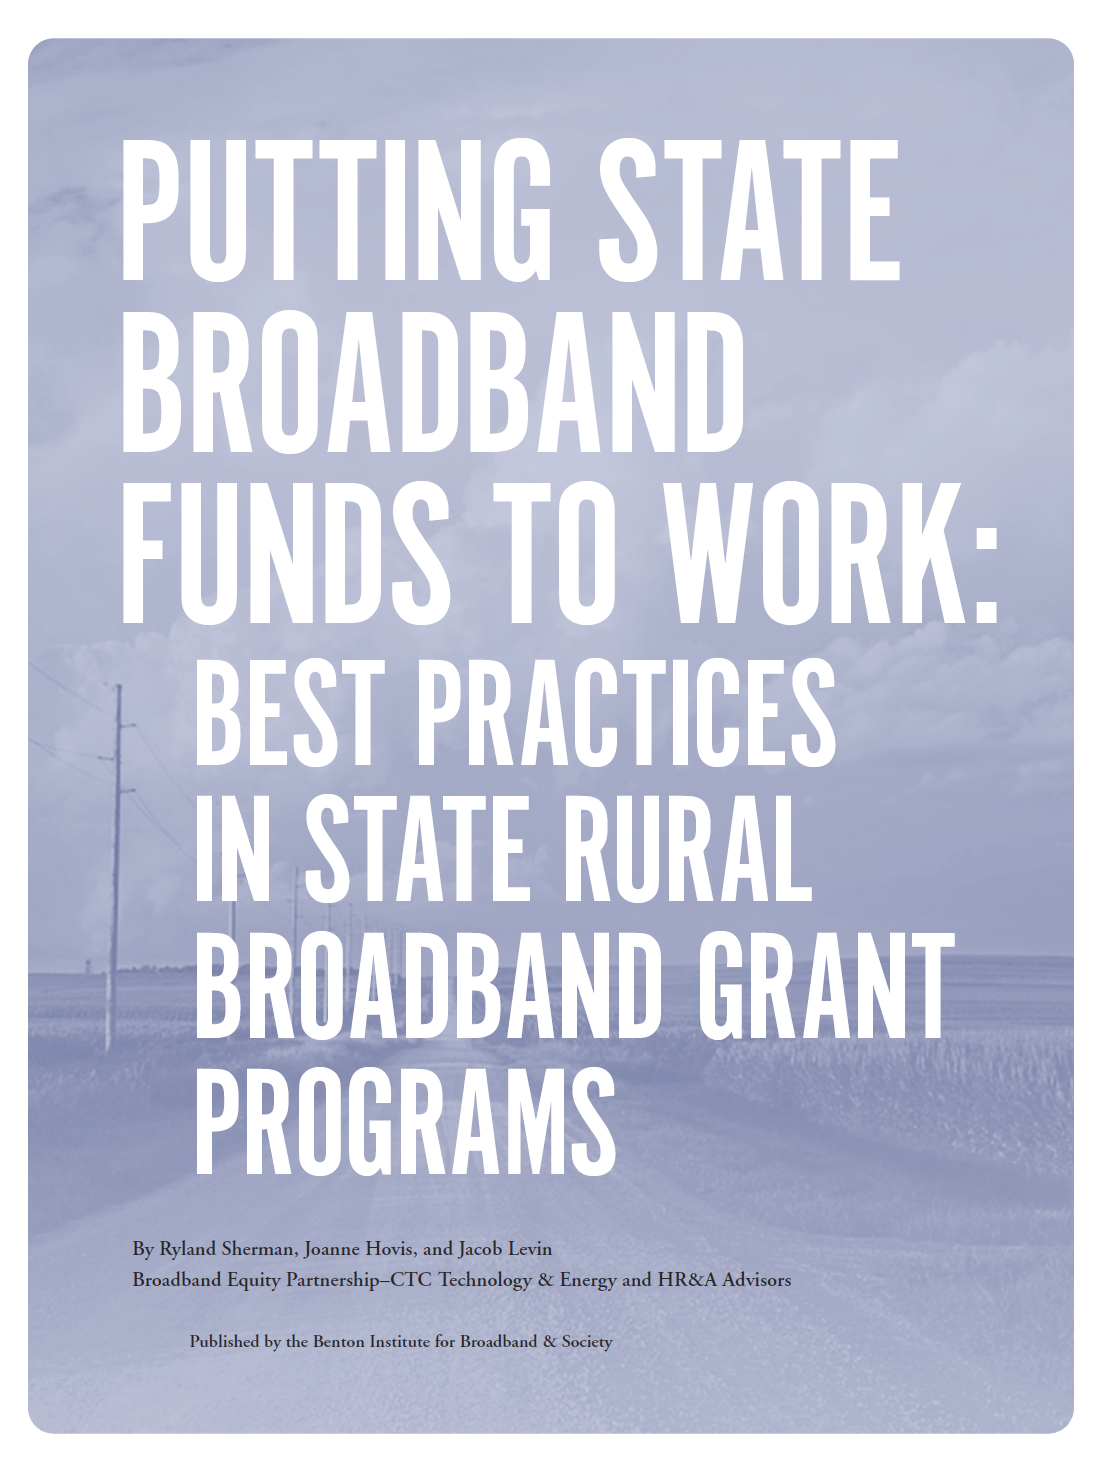 Putting State Broadband Funds to Work: Best Practices in State Rural Broadband Grant Programs